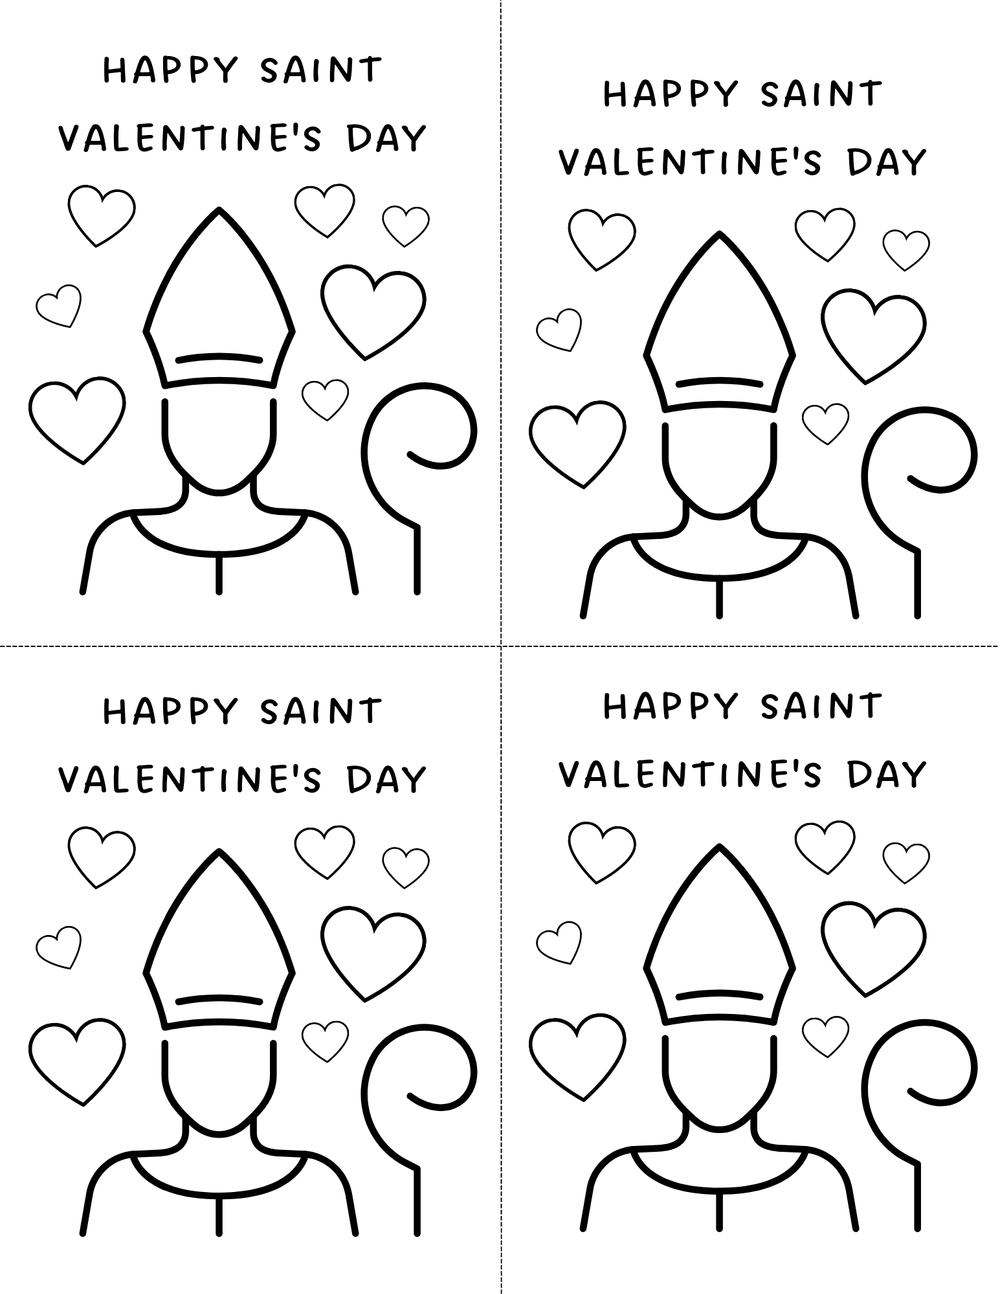 St valentines day guide